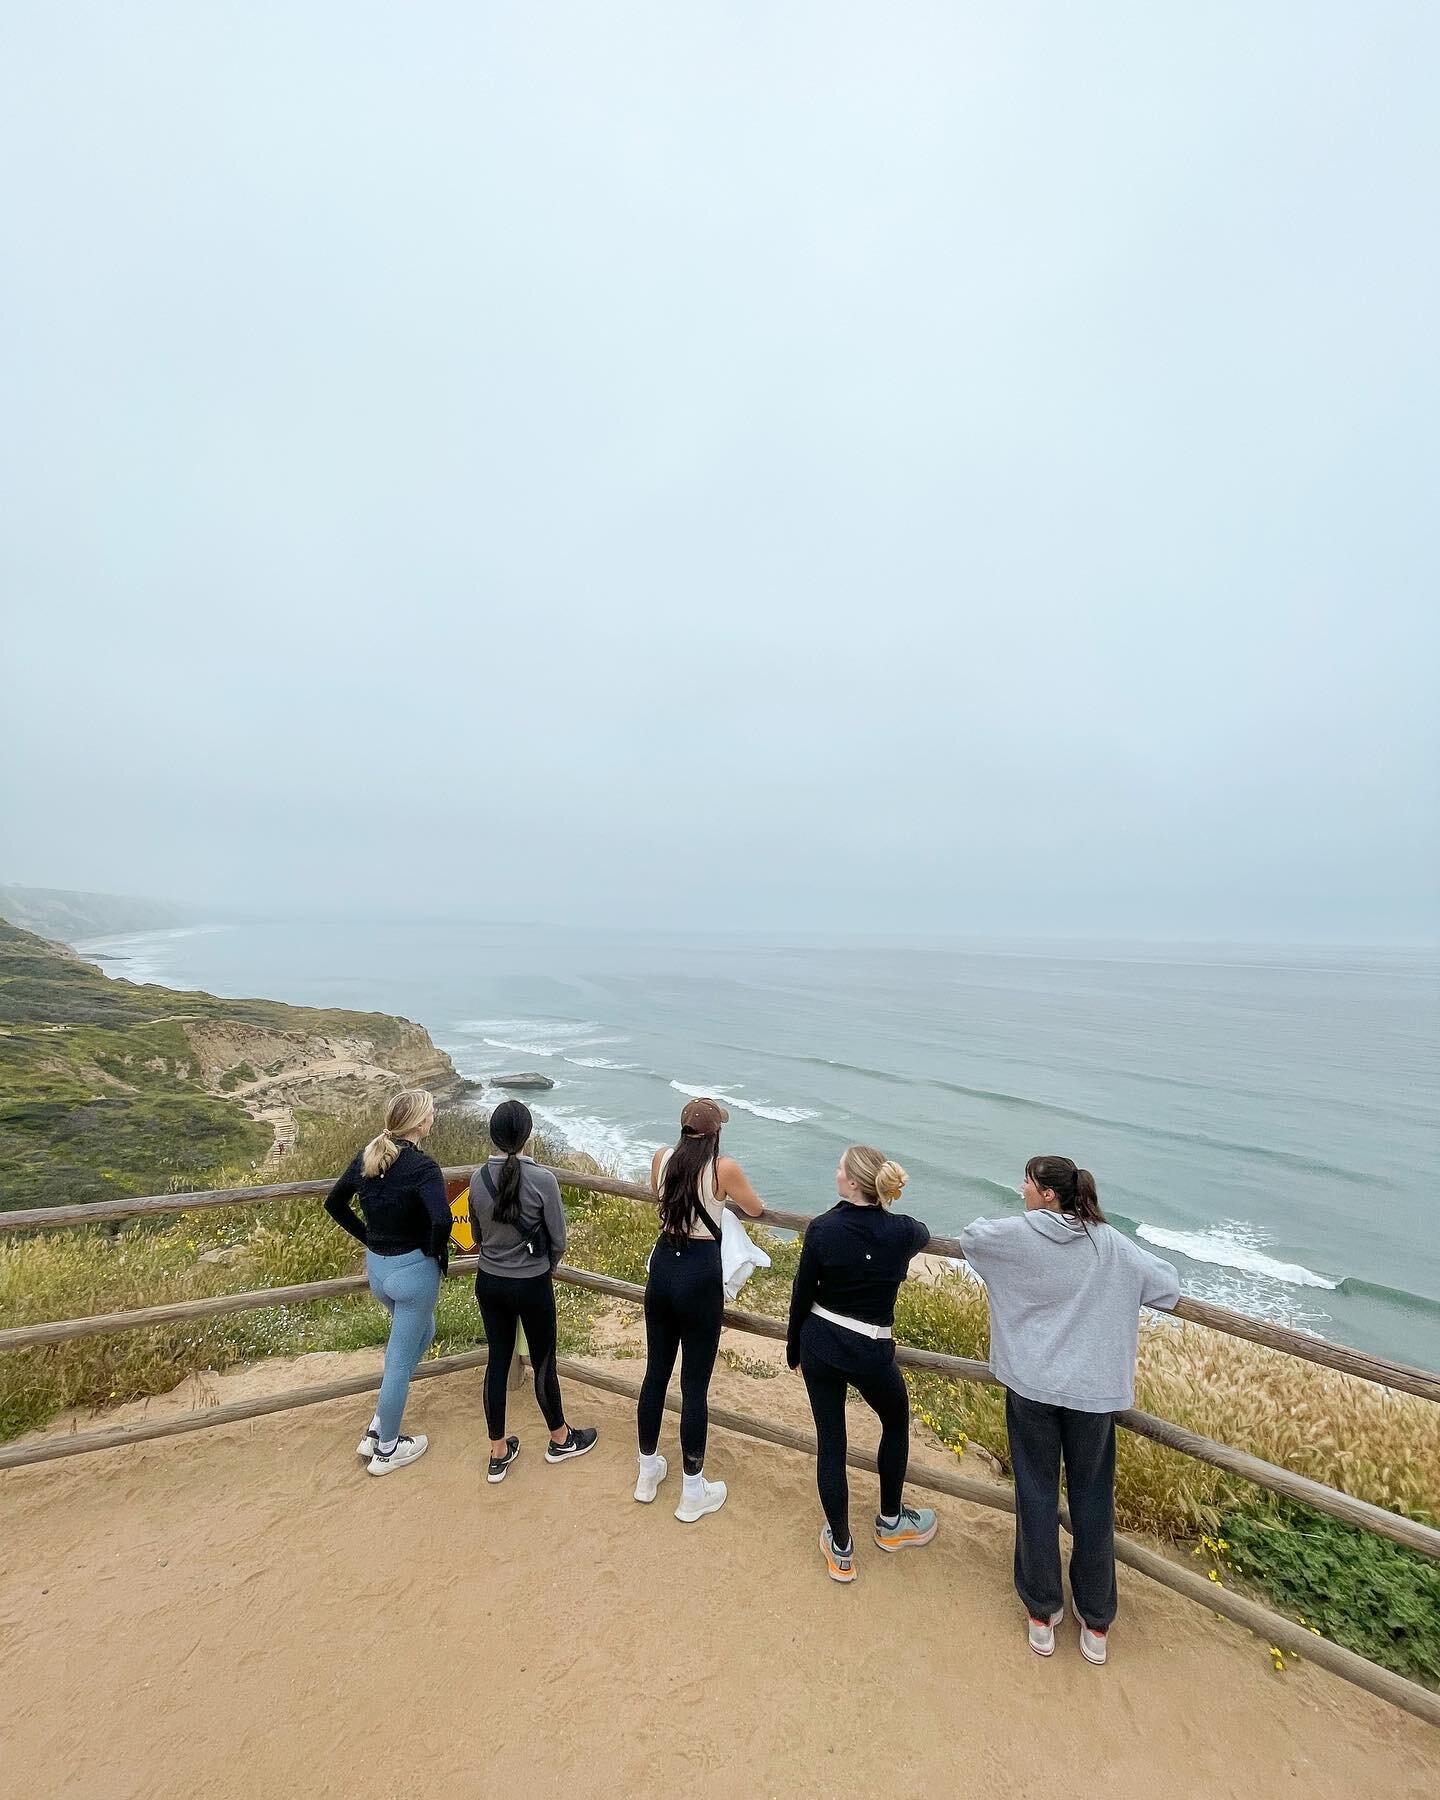 Whether it's company hikes or lunchtime walks, we encourage our employees to step away from their screens and connect with nature to rejuvenate. It sounds simple, but is a great mental health practice. ☀ #mentalhealthawarenessmonth